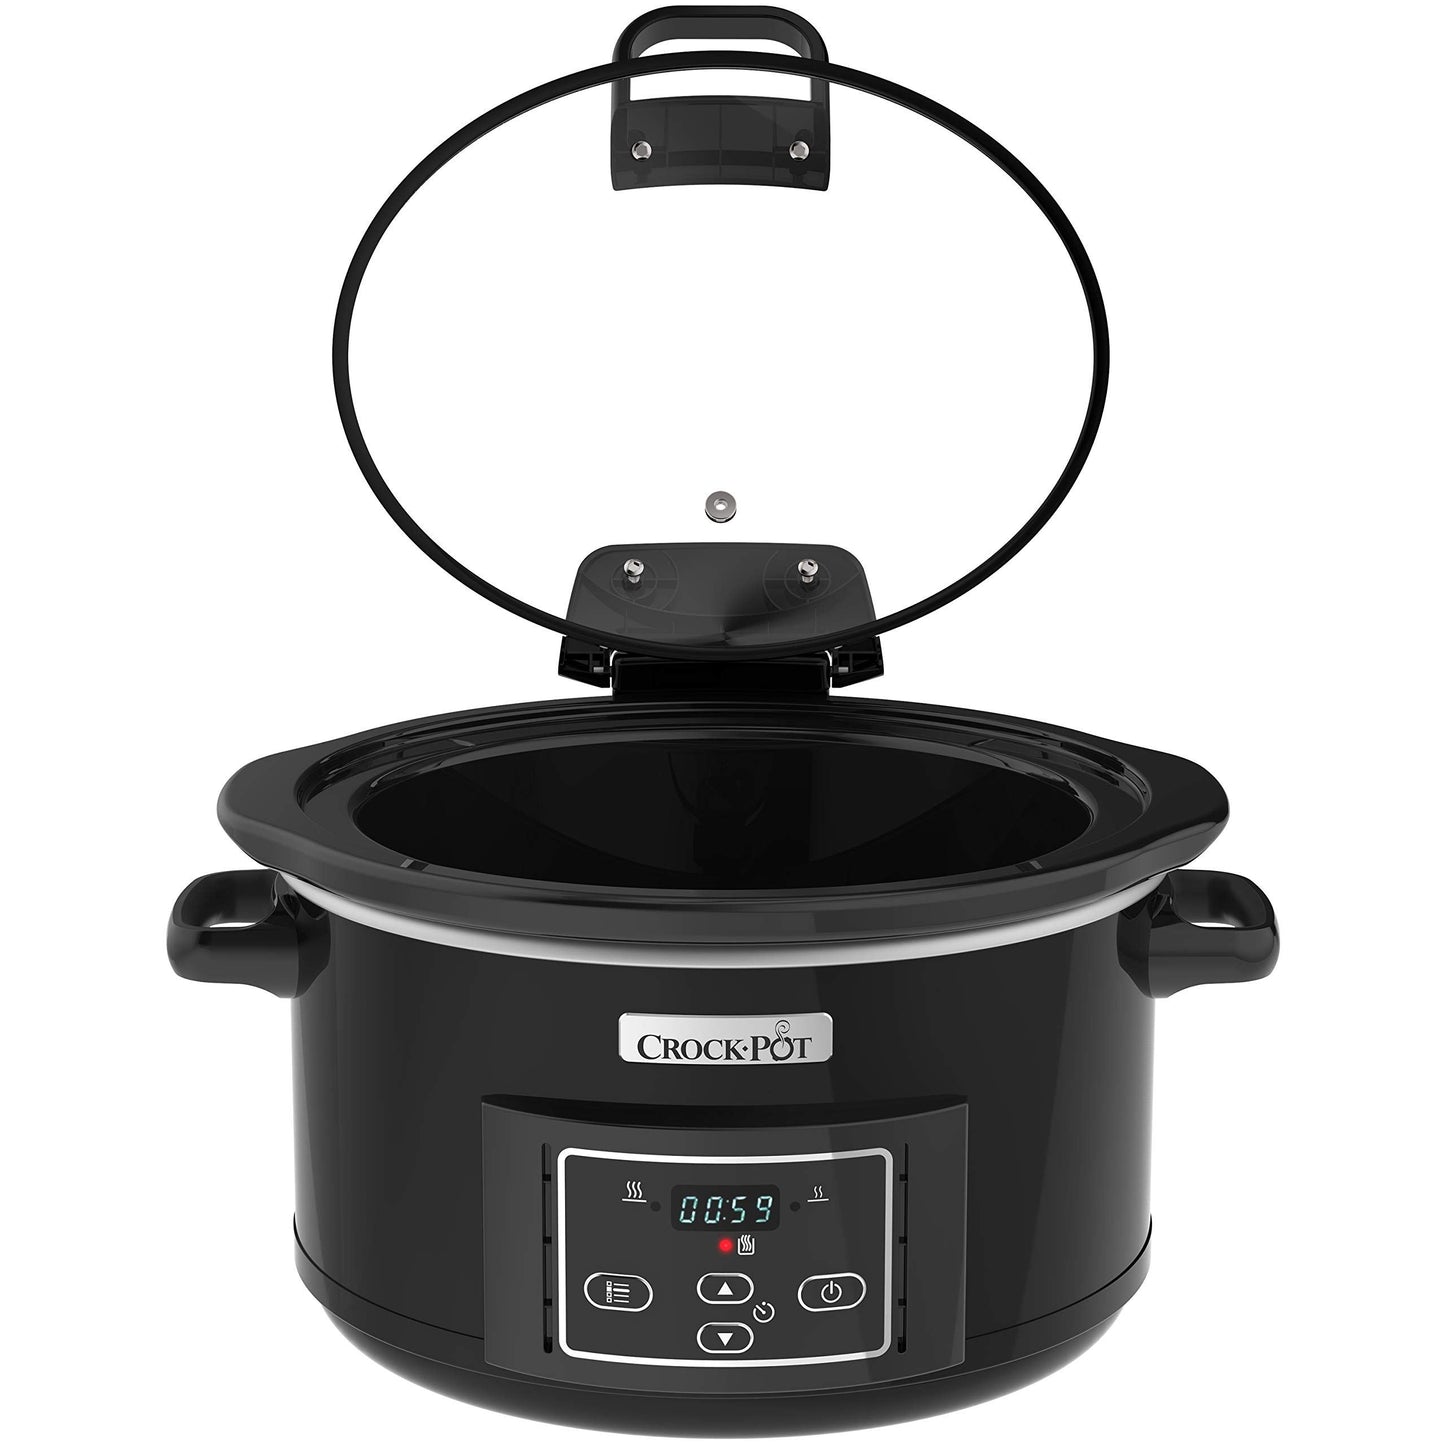 Crockpot 4.7L Lift and Serve Digital Slow Cooker with Hinged Lid